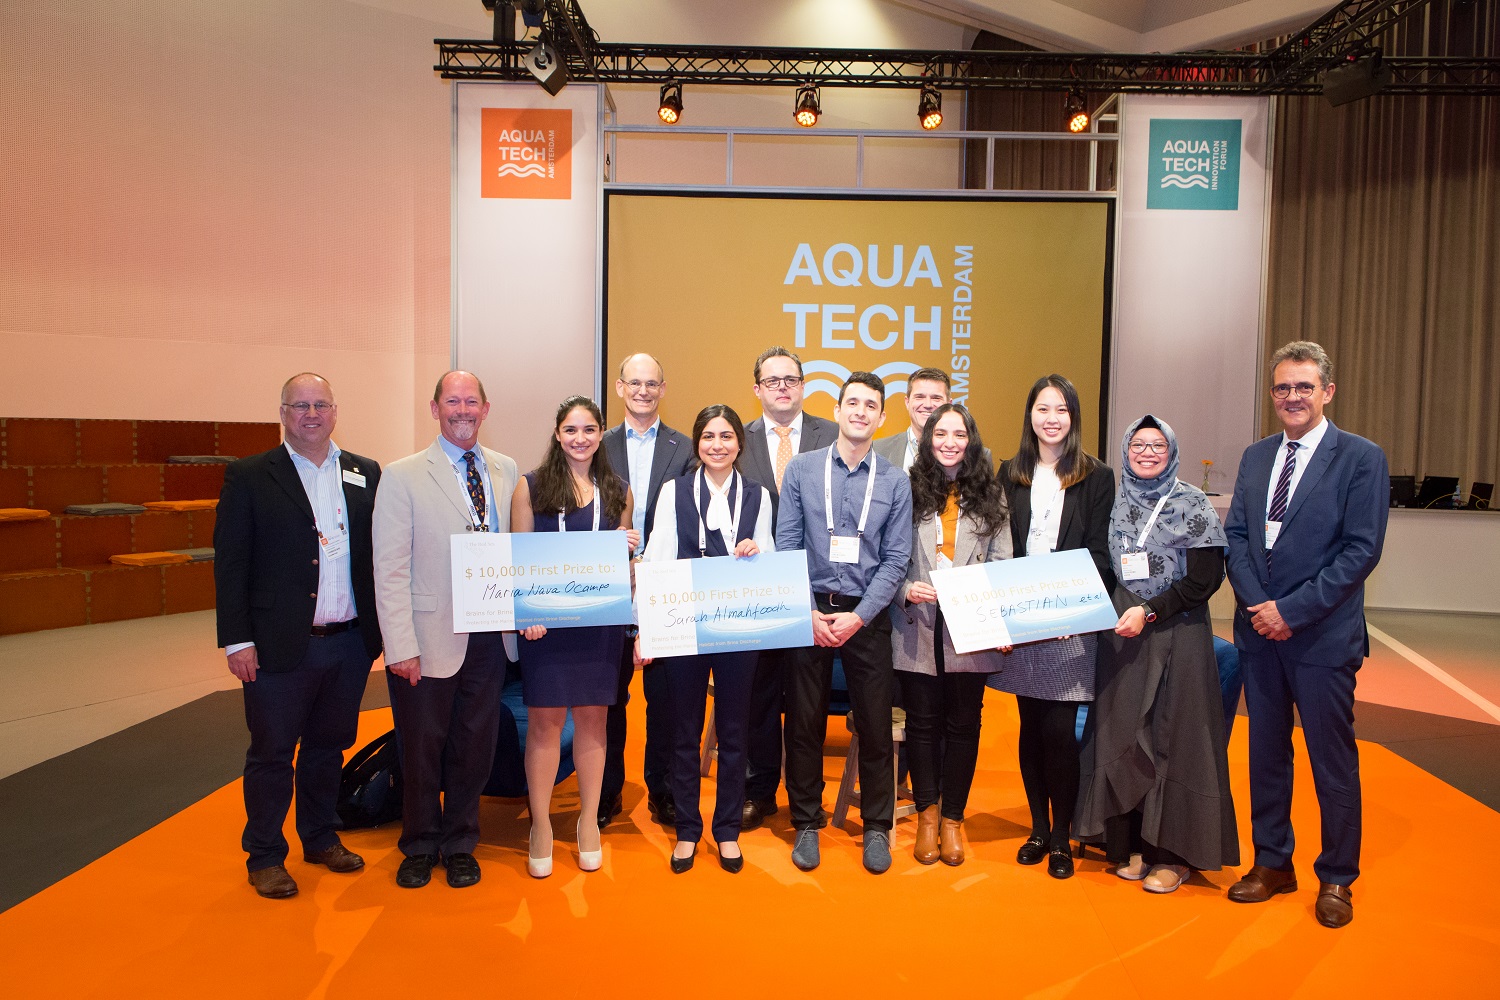 Mr. Martin Stahl, TRSDC (far right) presented the award to the winners of the Brains for Brine Challenge at Aquatech 2019. (Image: TRSDC)